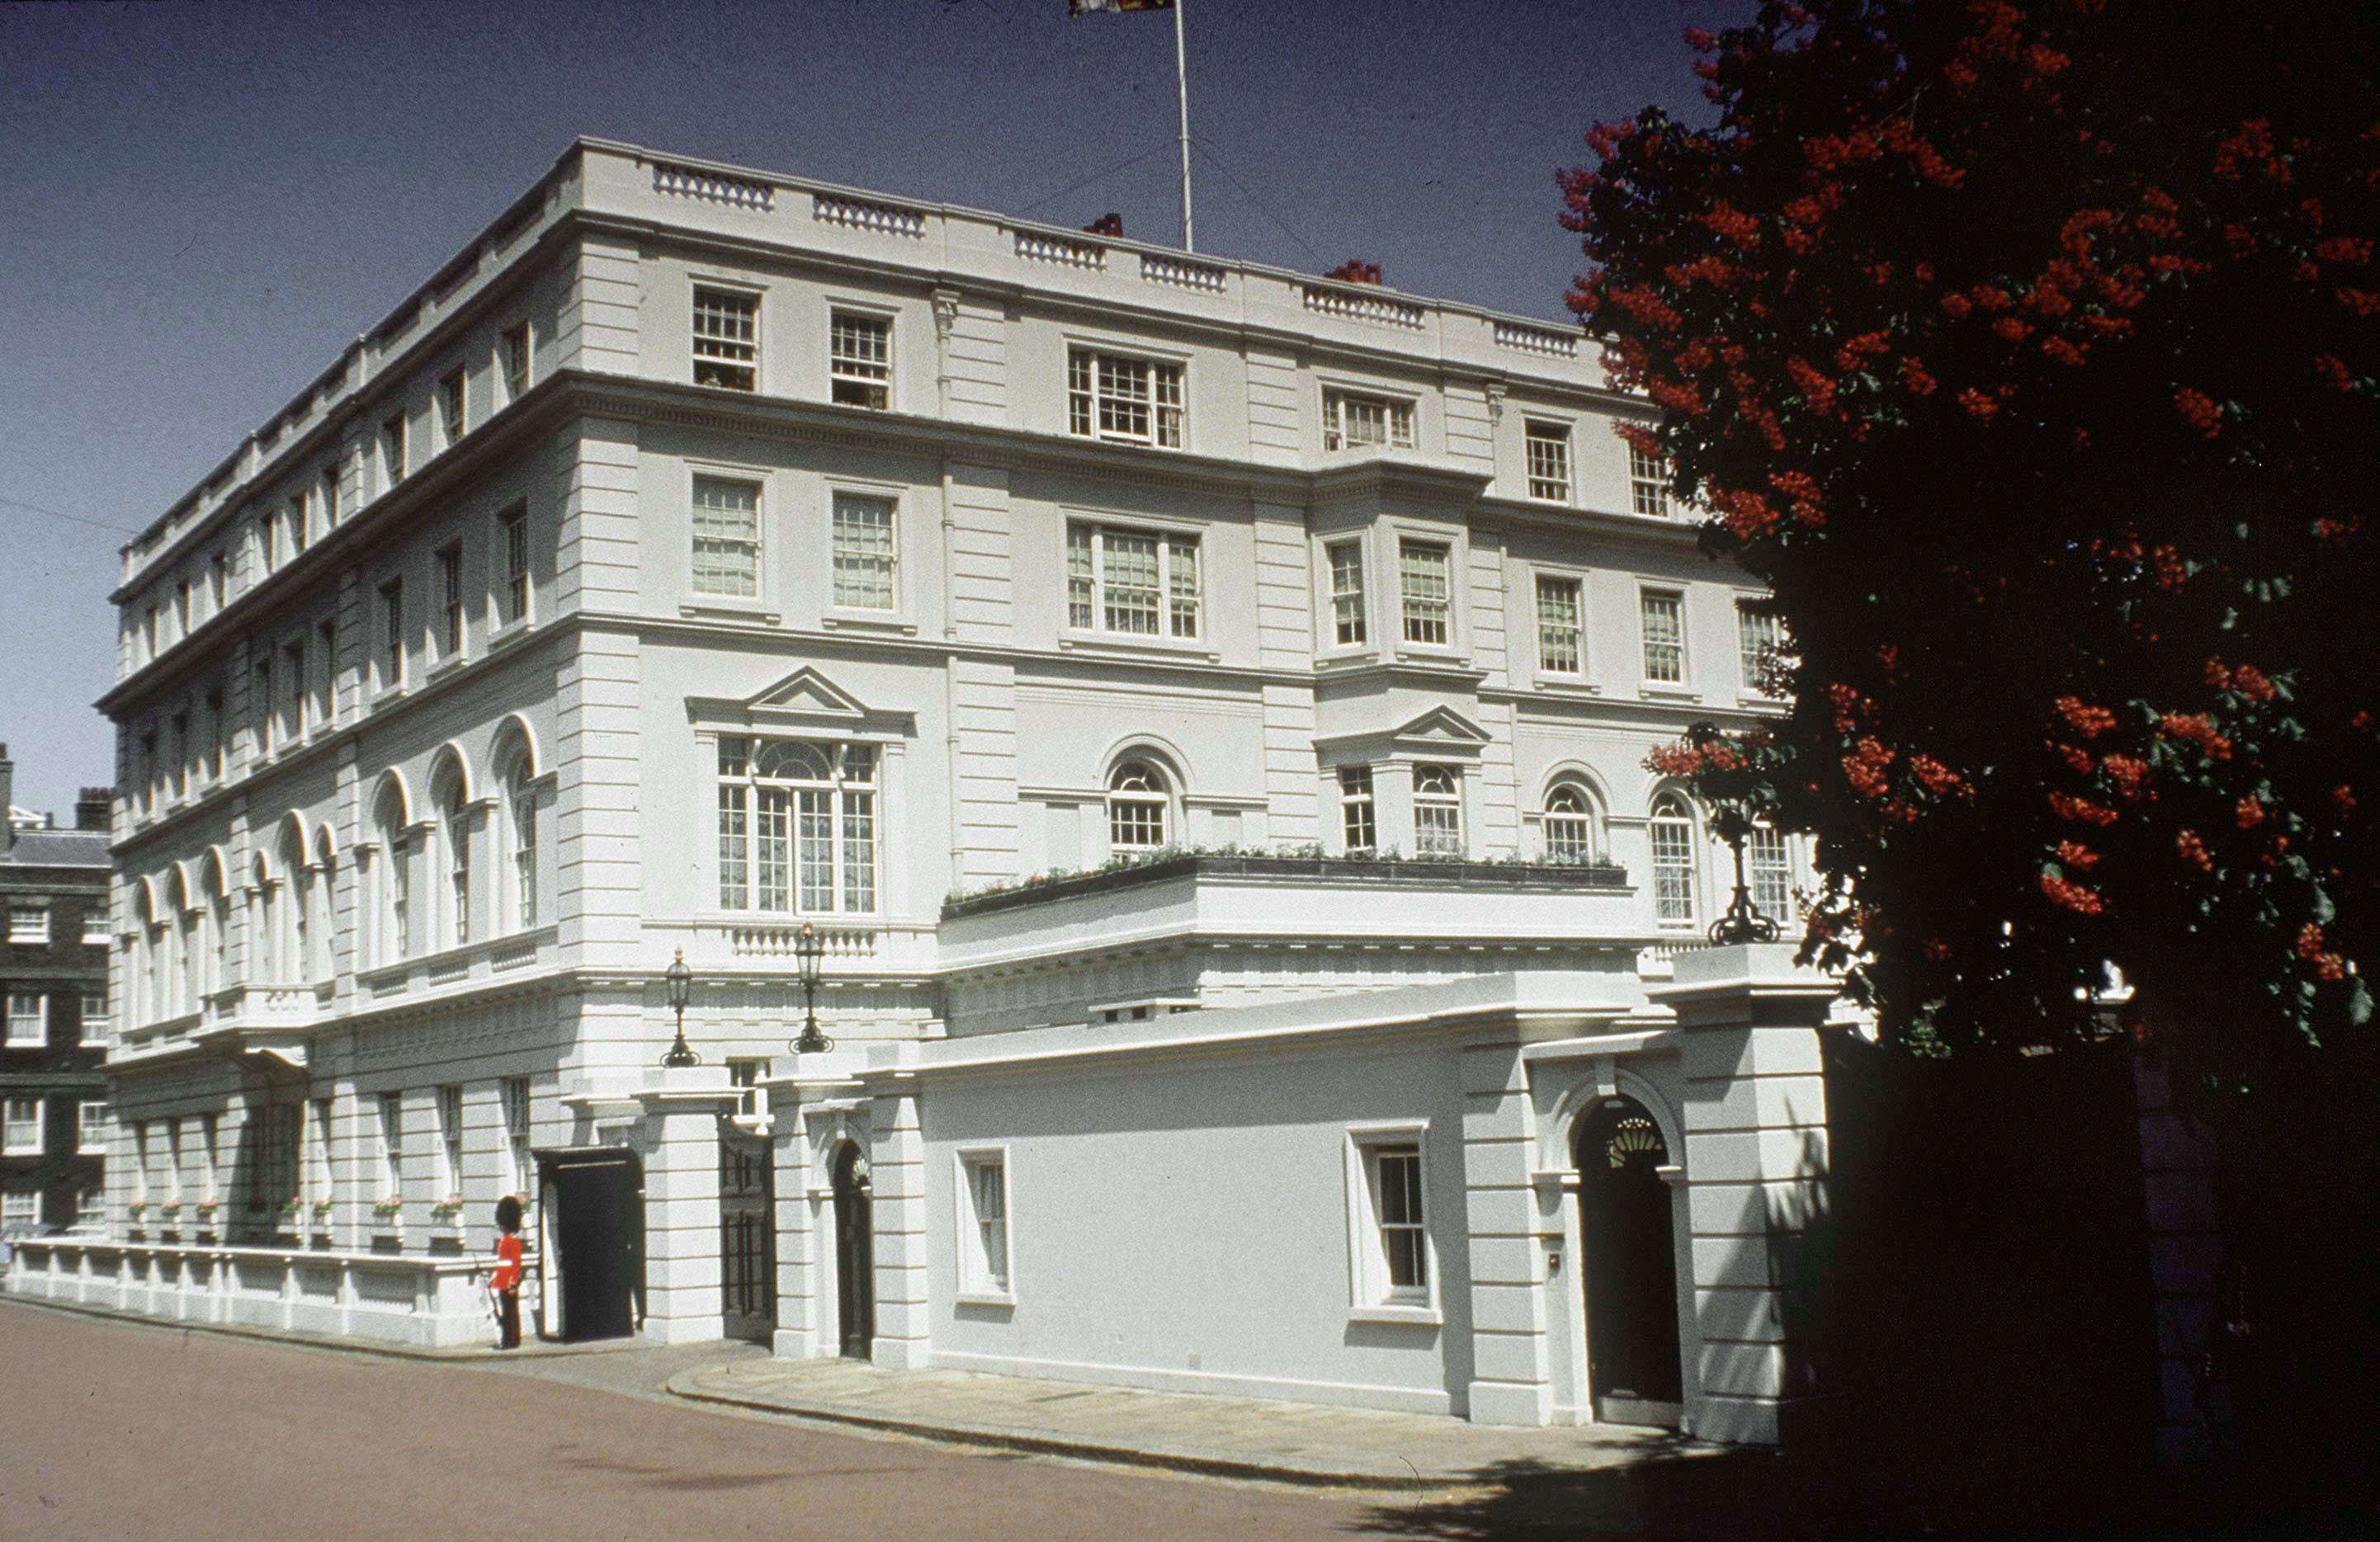 View of Clarence House from the street